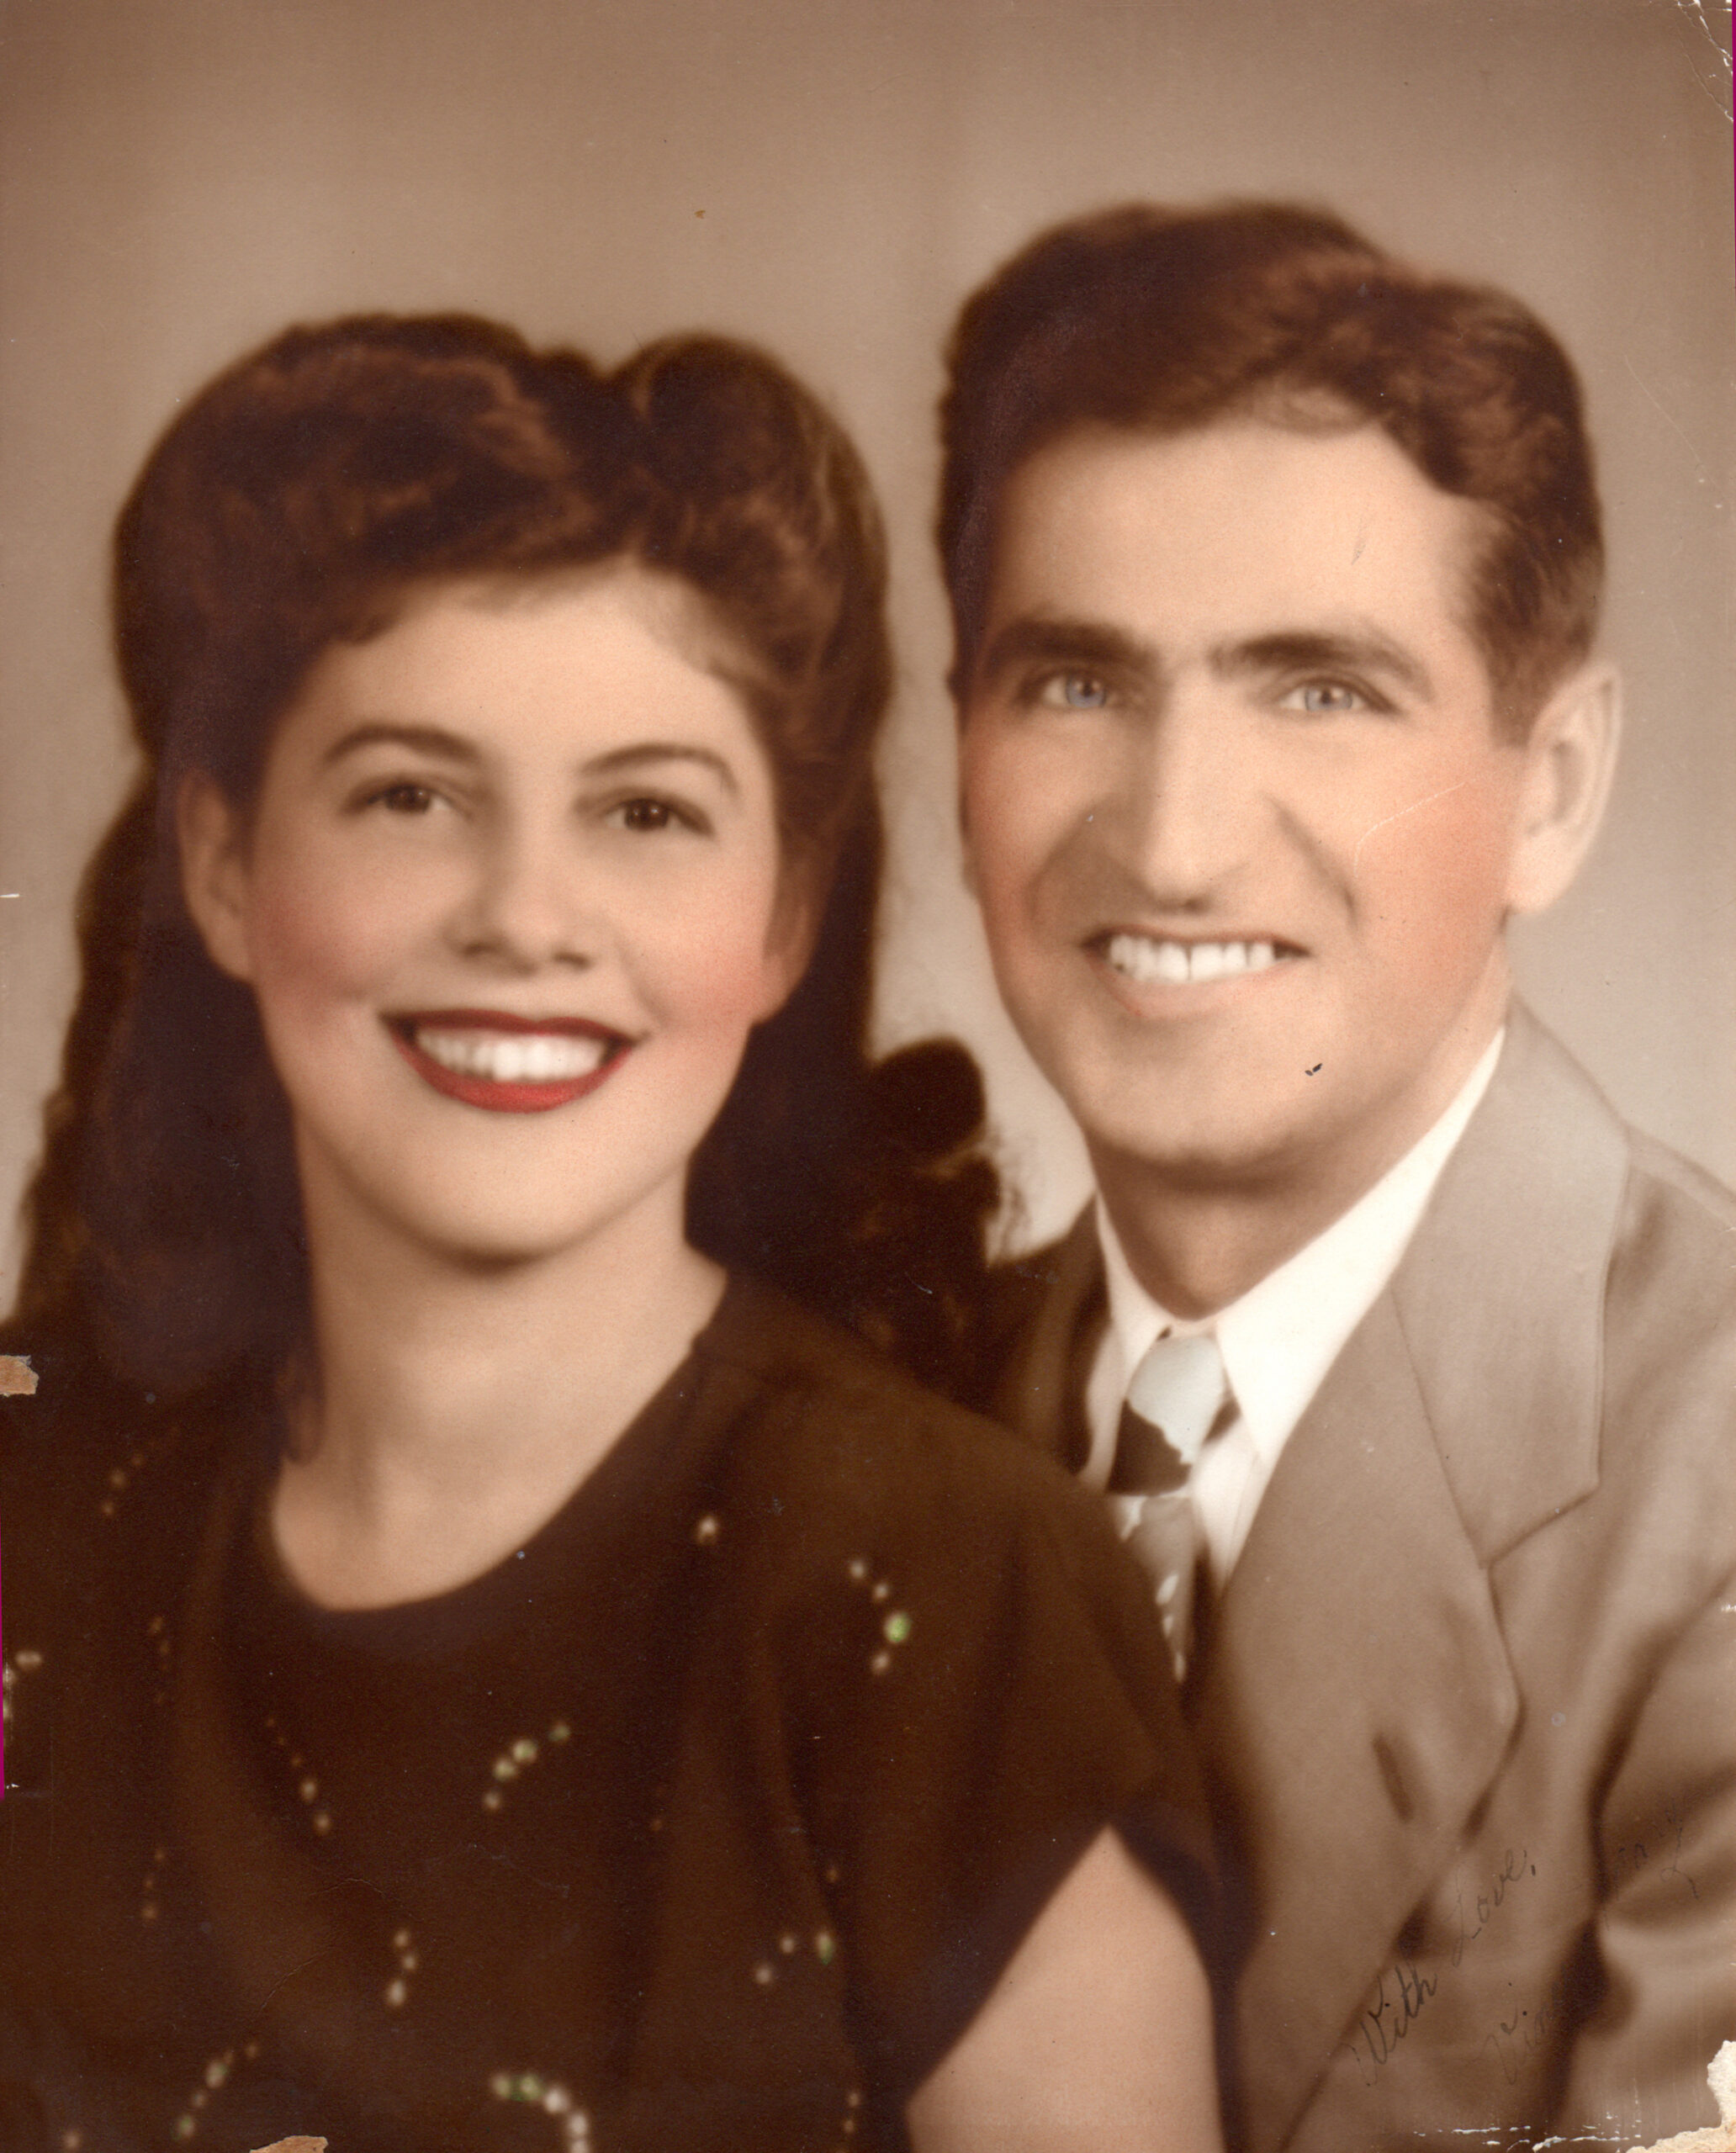 Mary Merlo and Vincent Biondi smile and pose for a professional closeup photo in 1947.